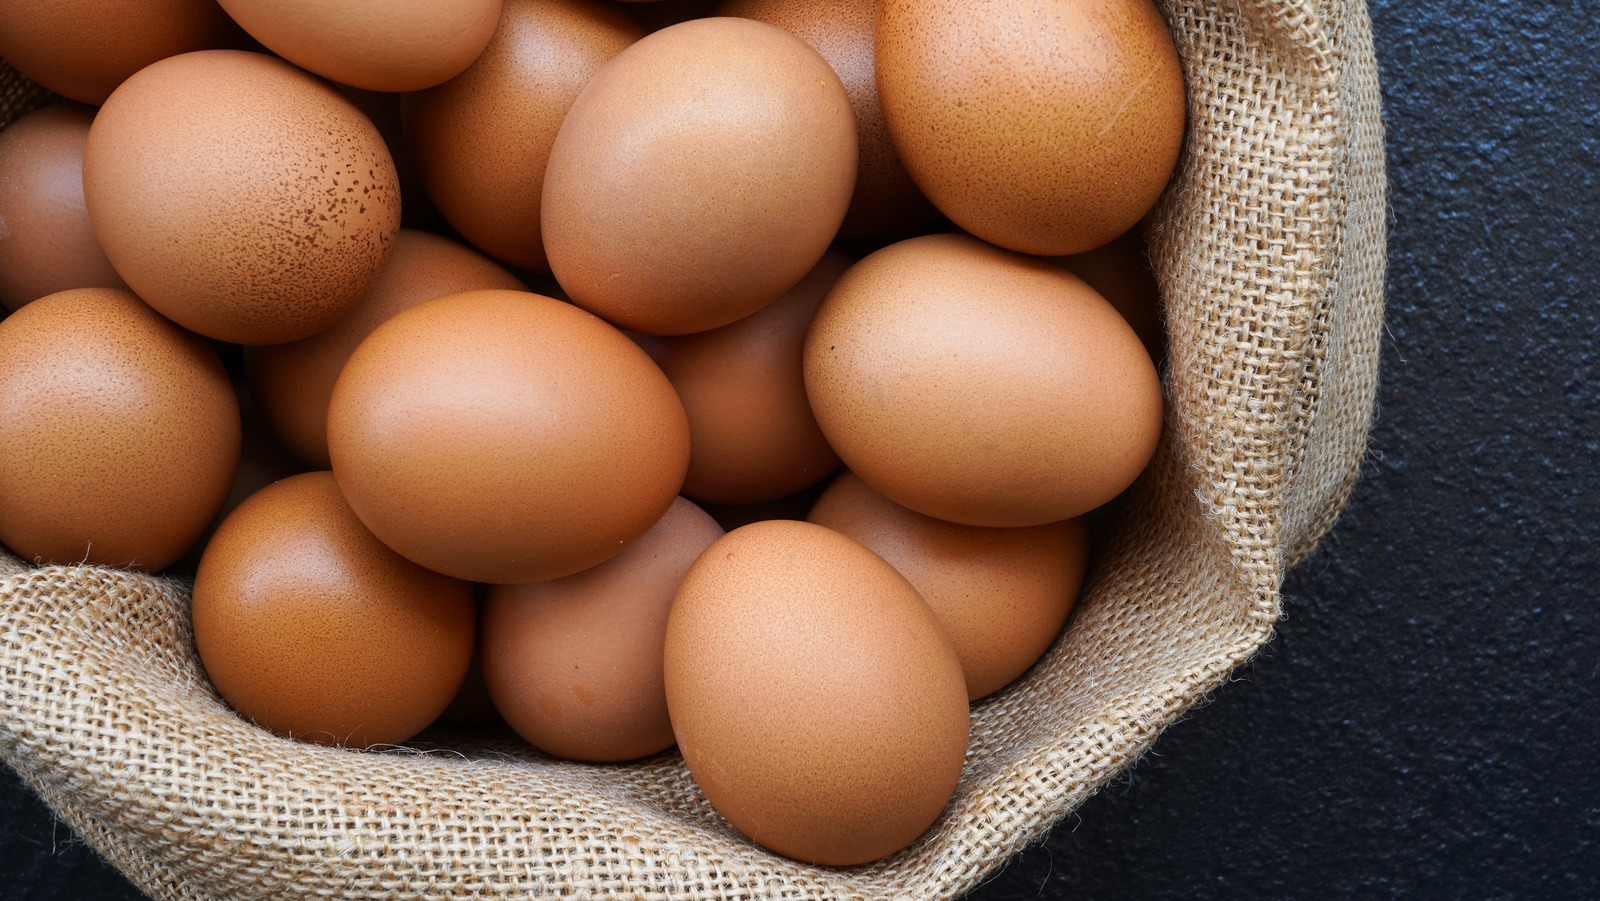 Details more than 140 eating eggs for hair growth